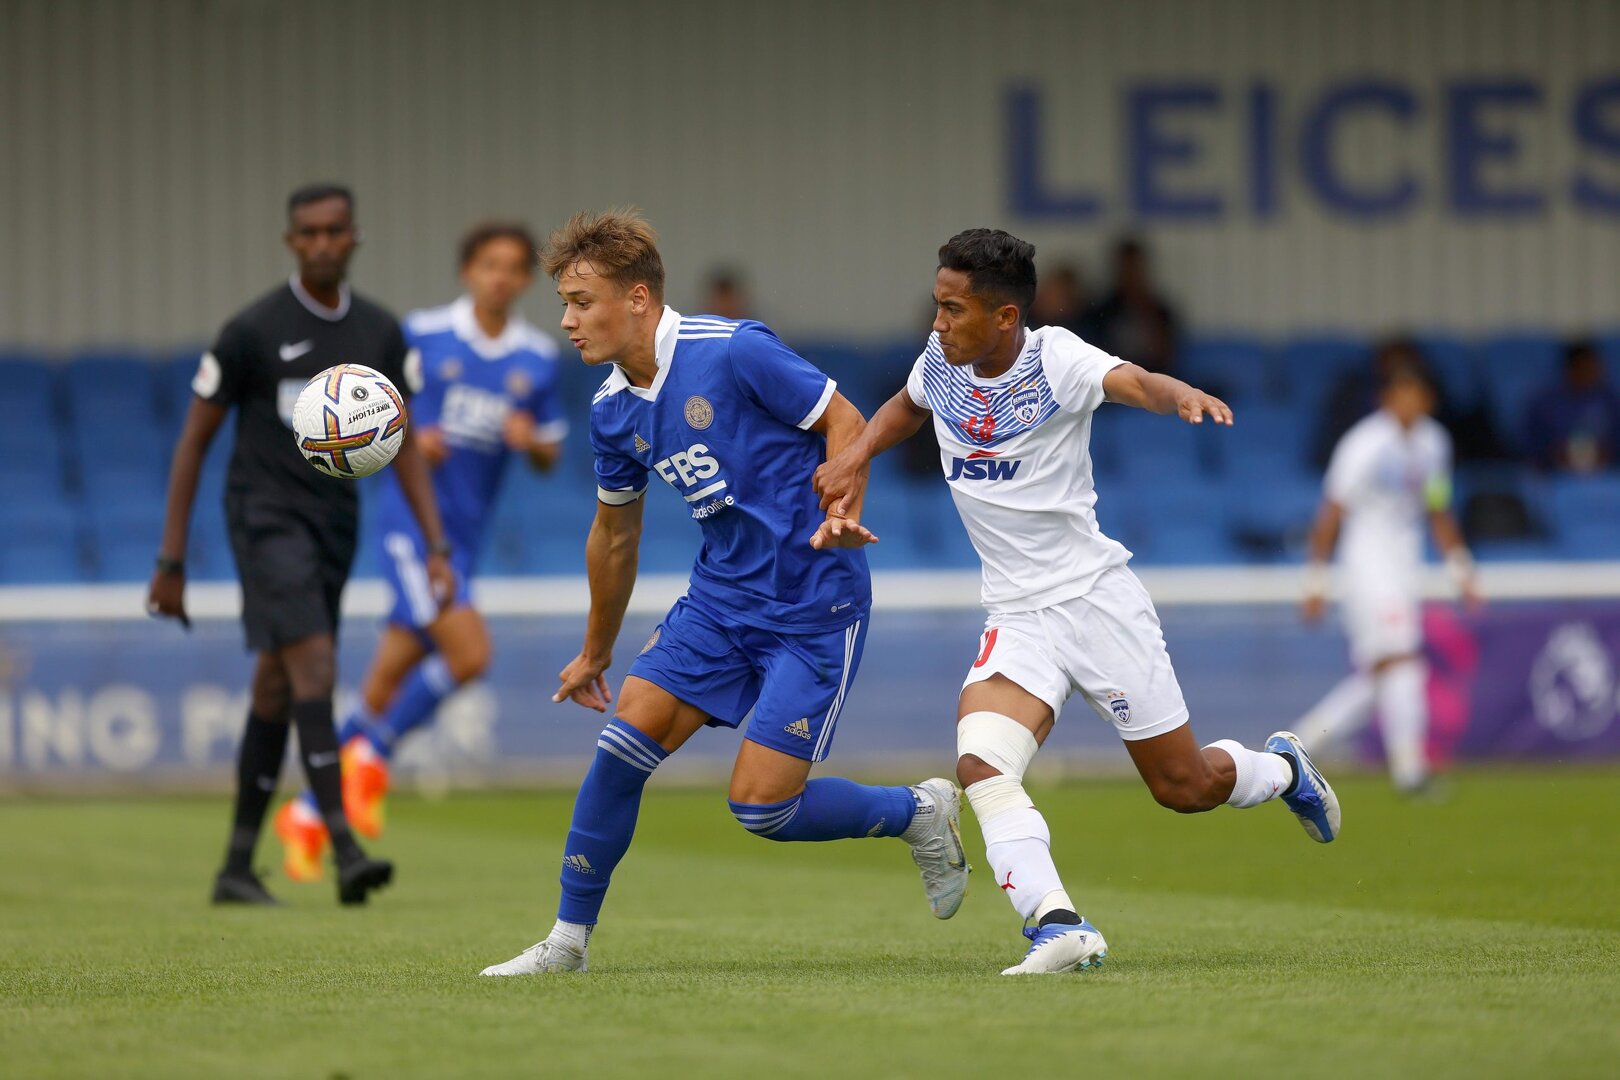 Bengaluru FC in action against leicester City